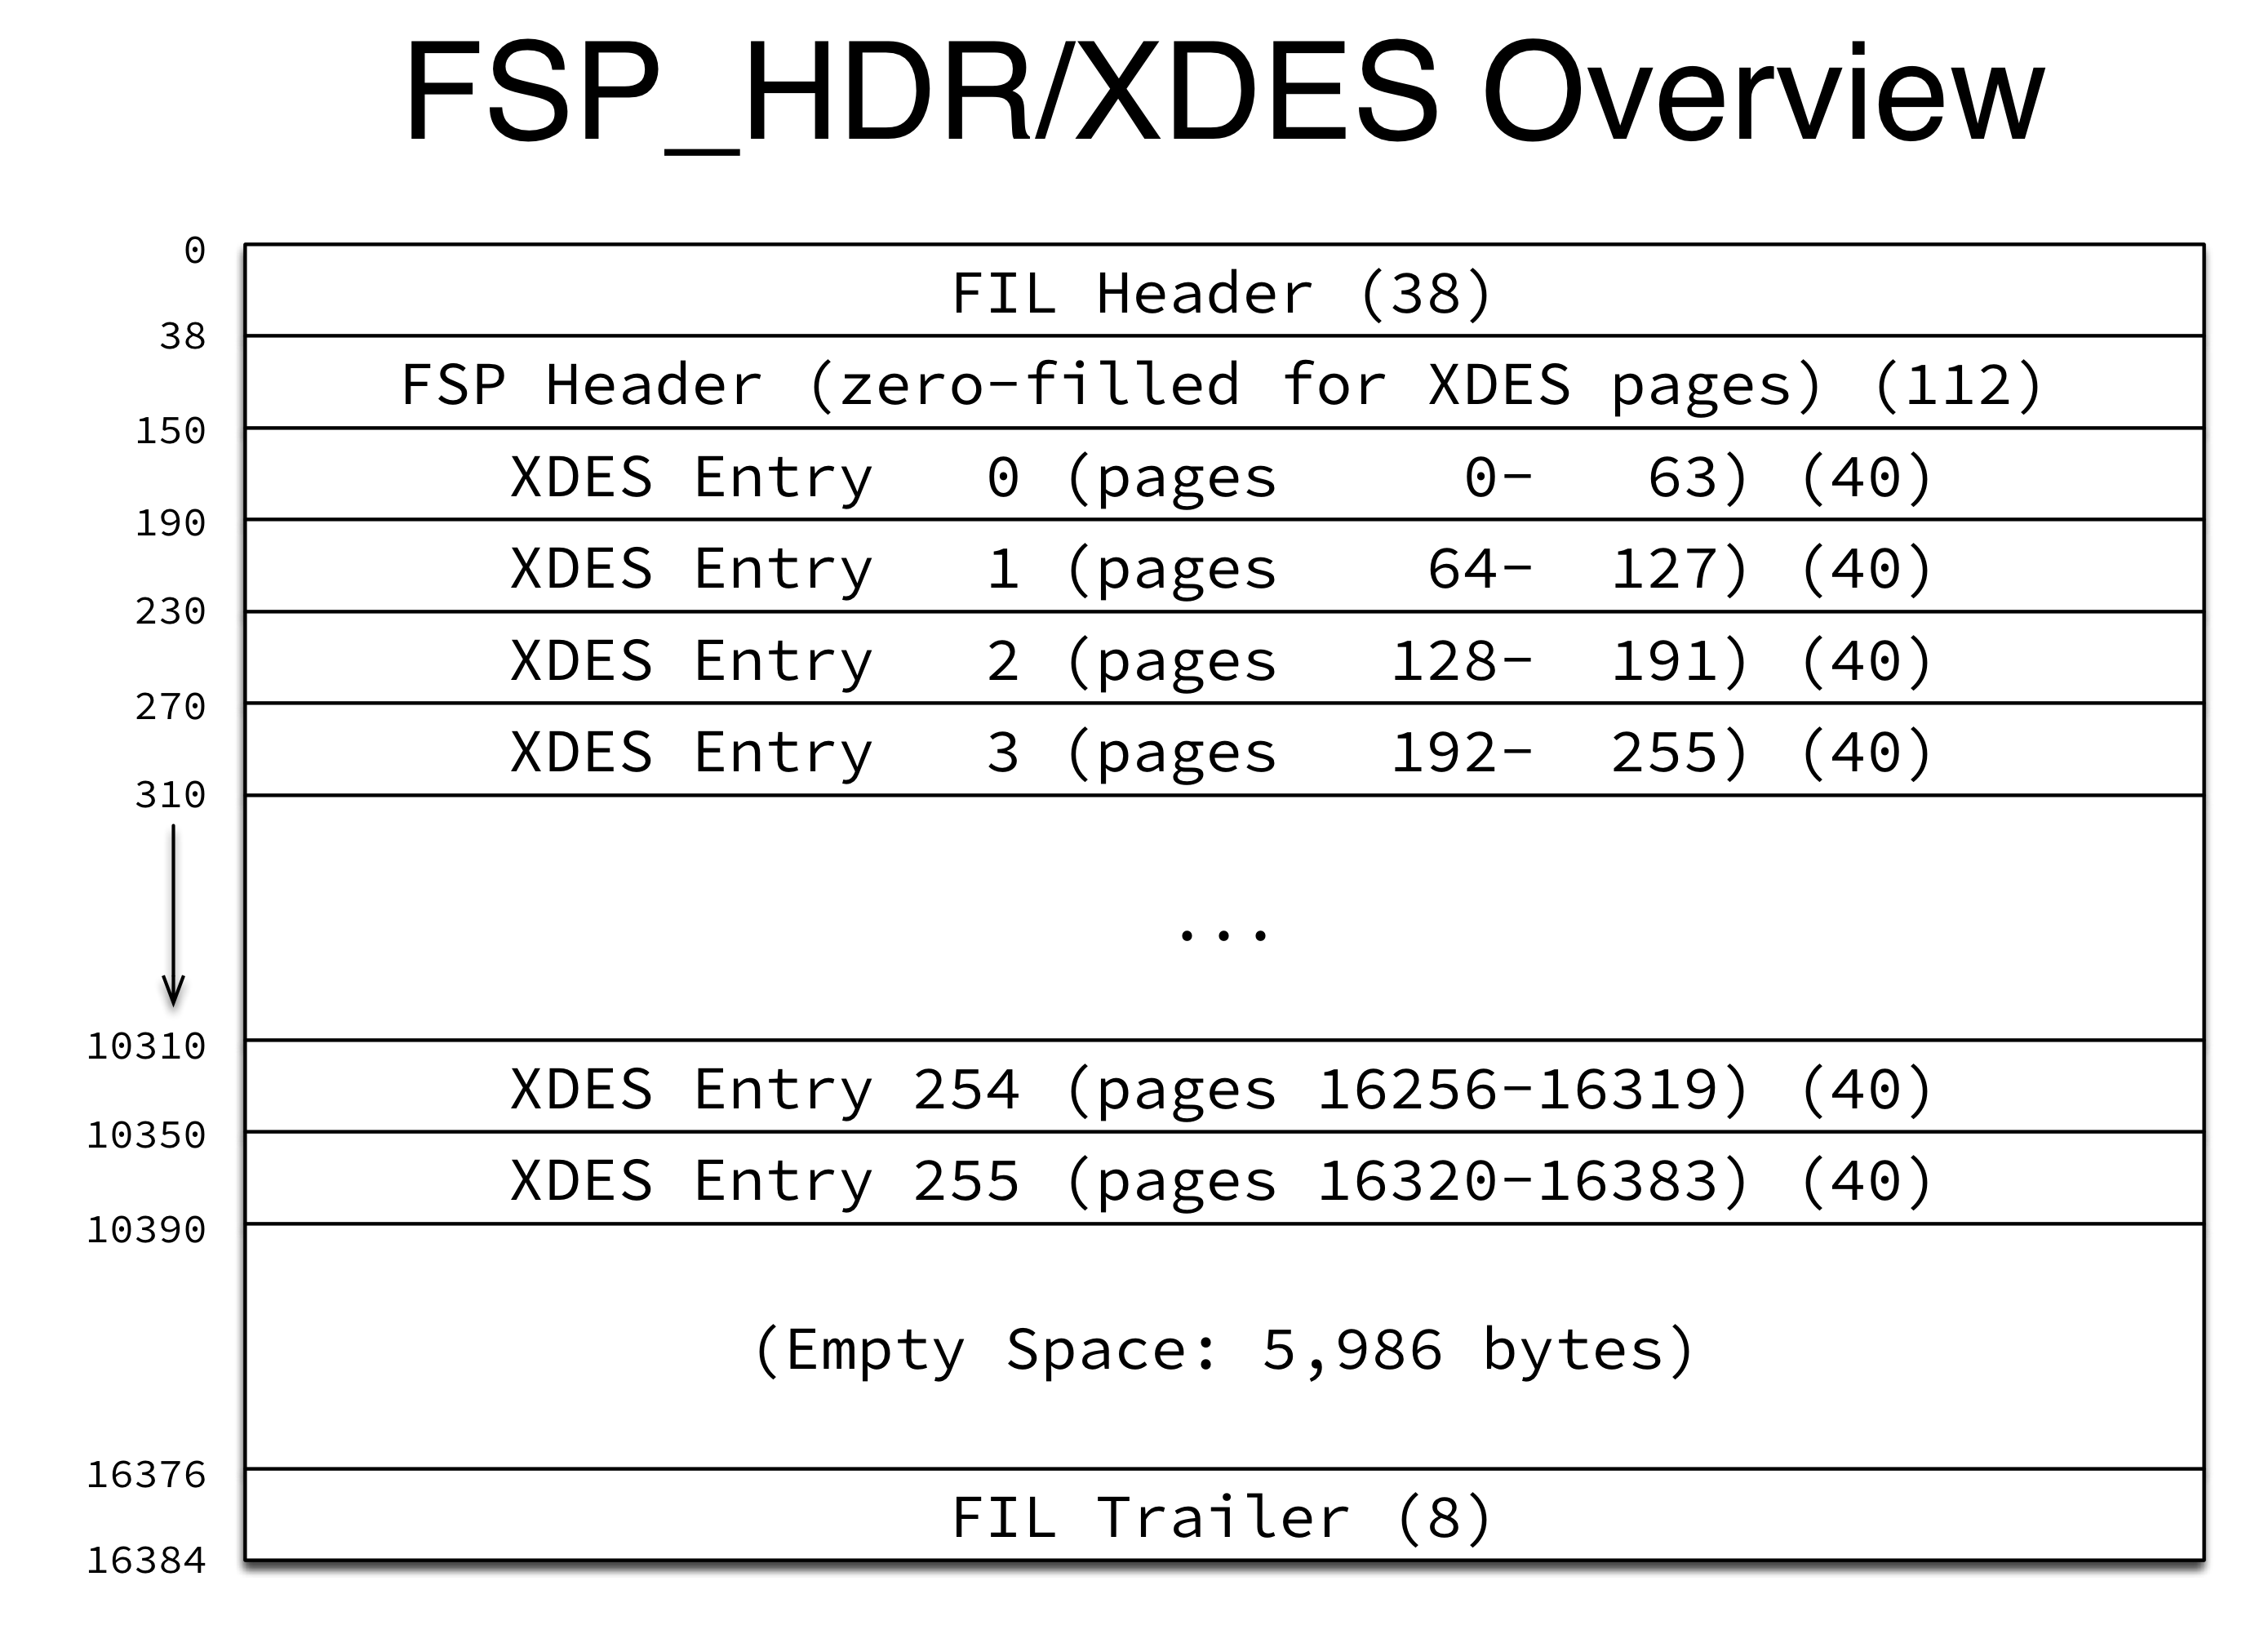 FSP_HDR Page Overview